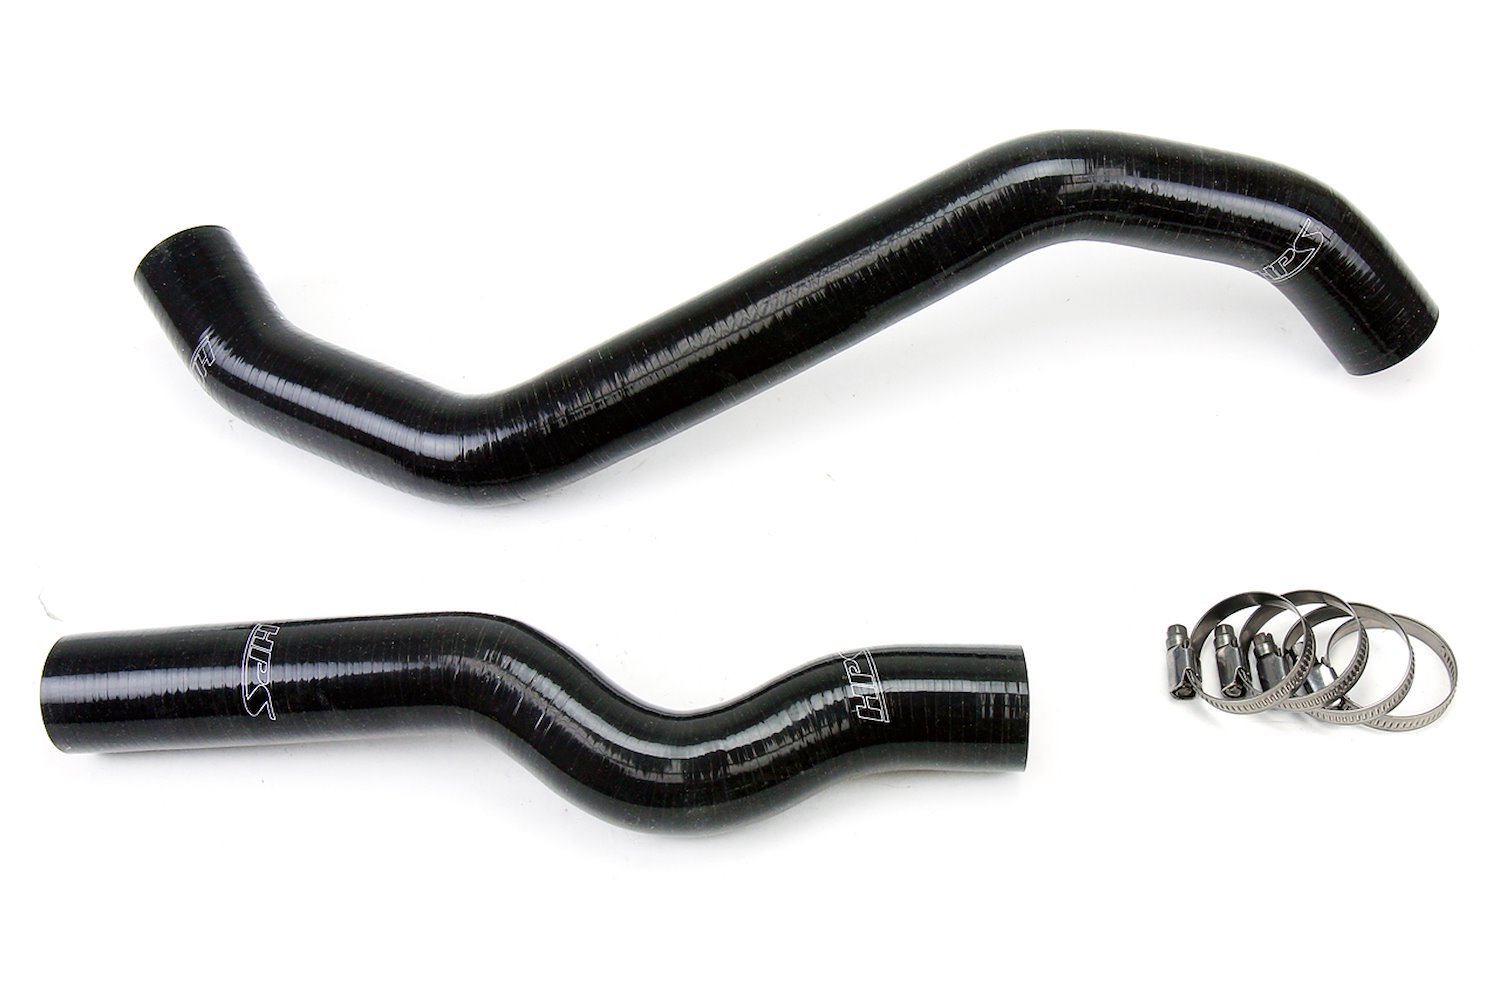 57-1792R-BLK Radiator Hose Kit, High-Temp 3-Ply Reinforced Silicone, Replace OEM Rubber Radiator Coolant Hoses